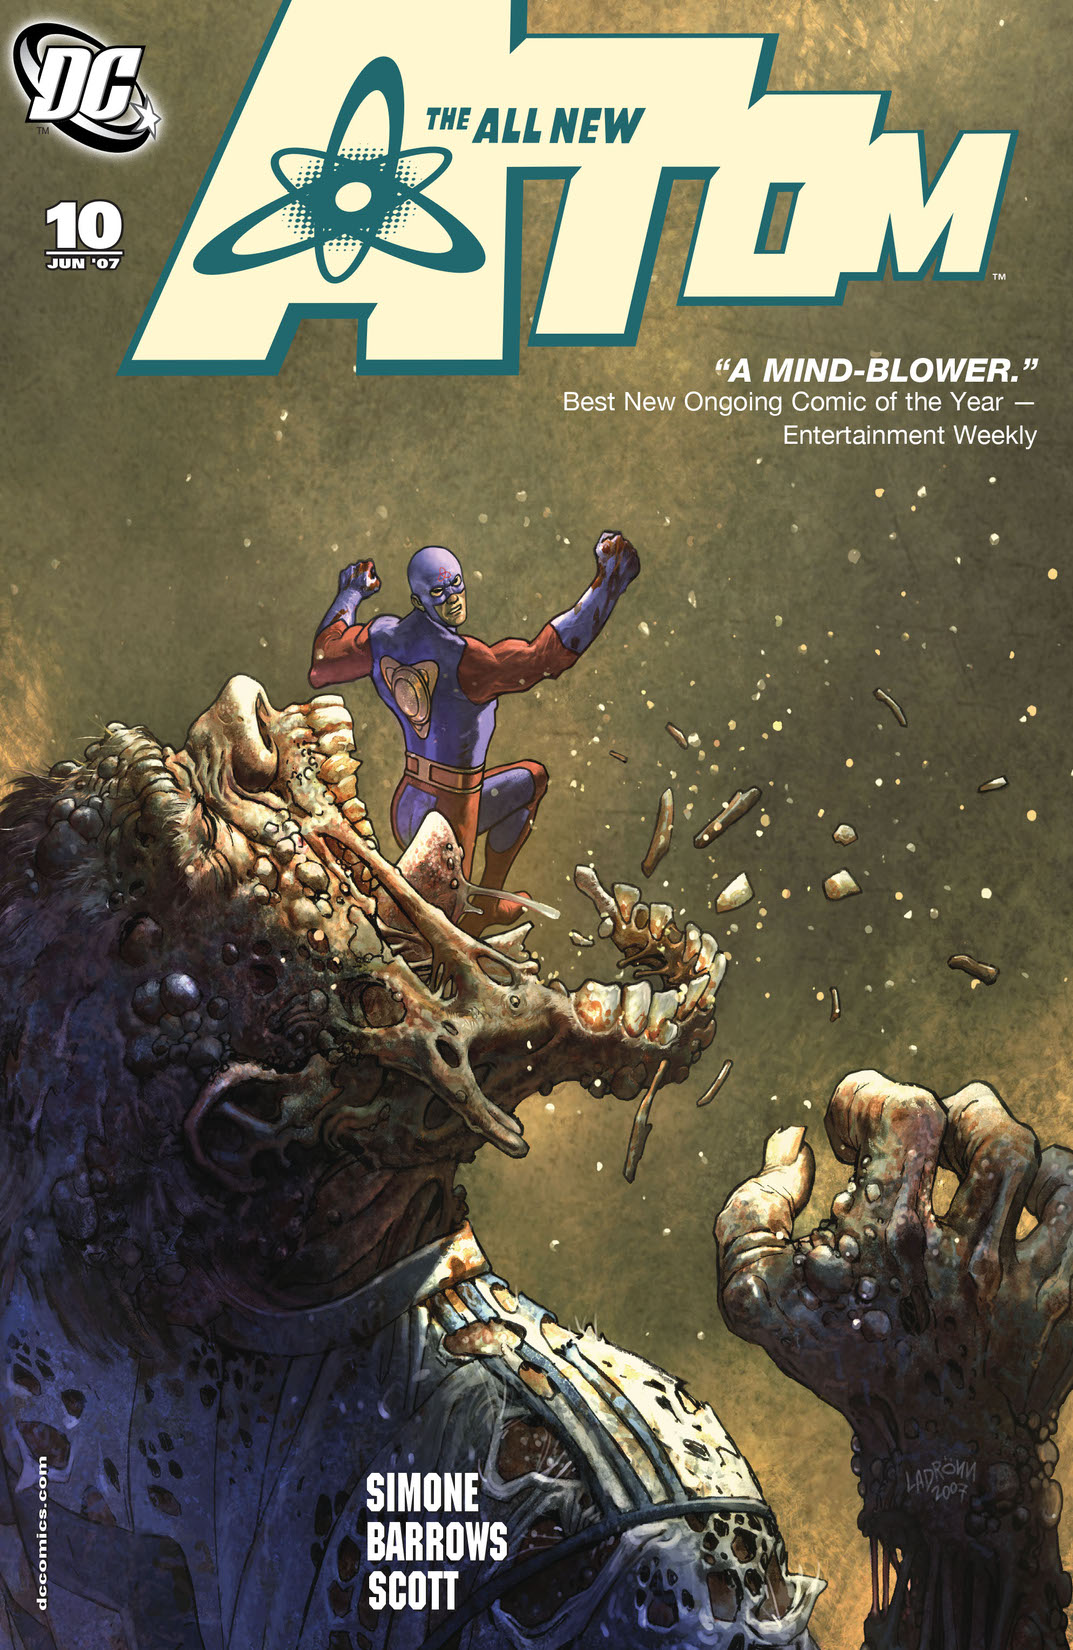 The All New Atom #10 preview images